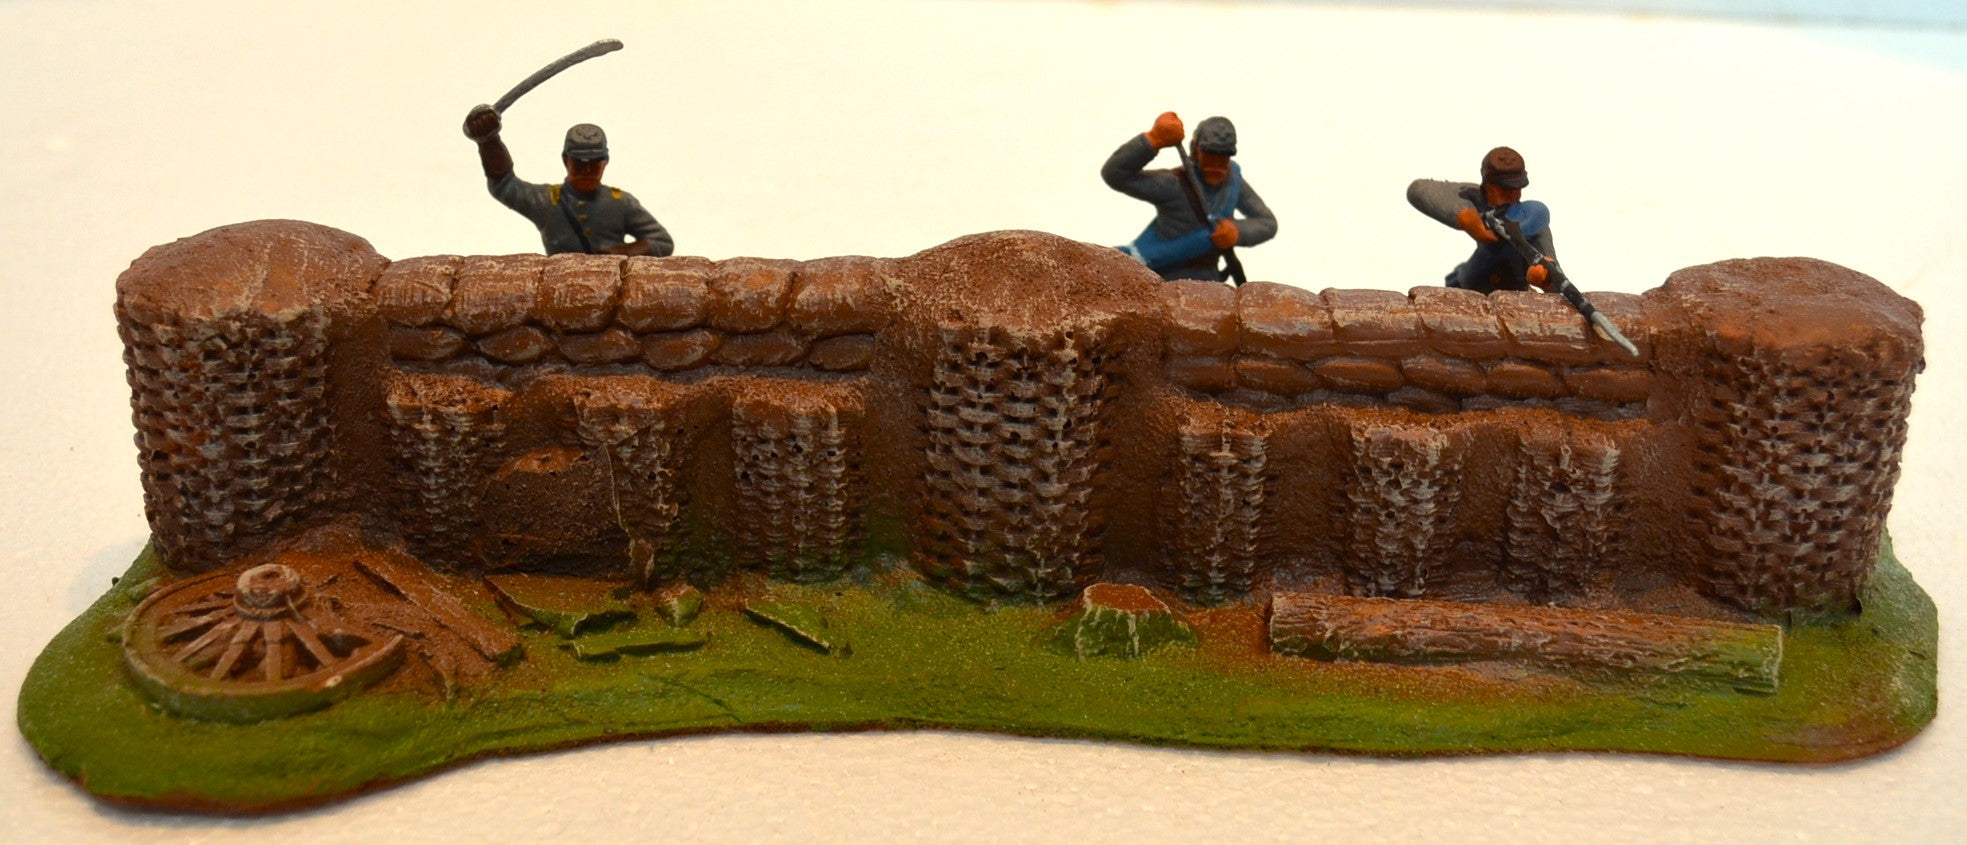 ATHERTON SCENICS PAINTED CIVIL WAR FIRING STAND DEFENSIVE POSITION - 9504